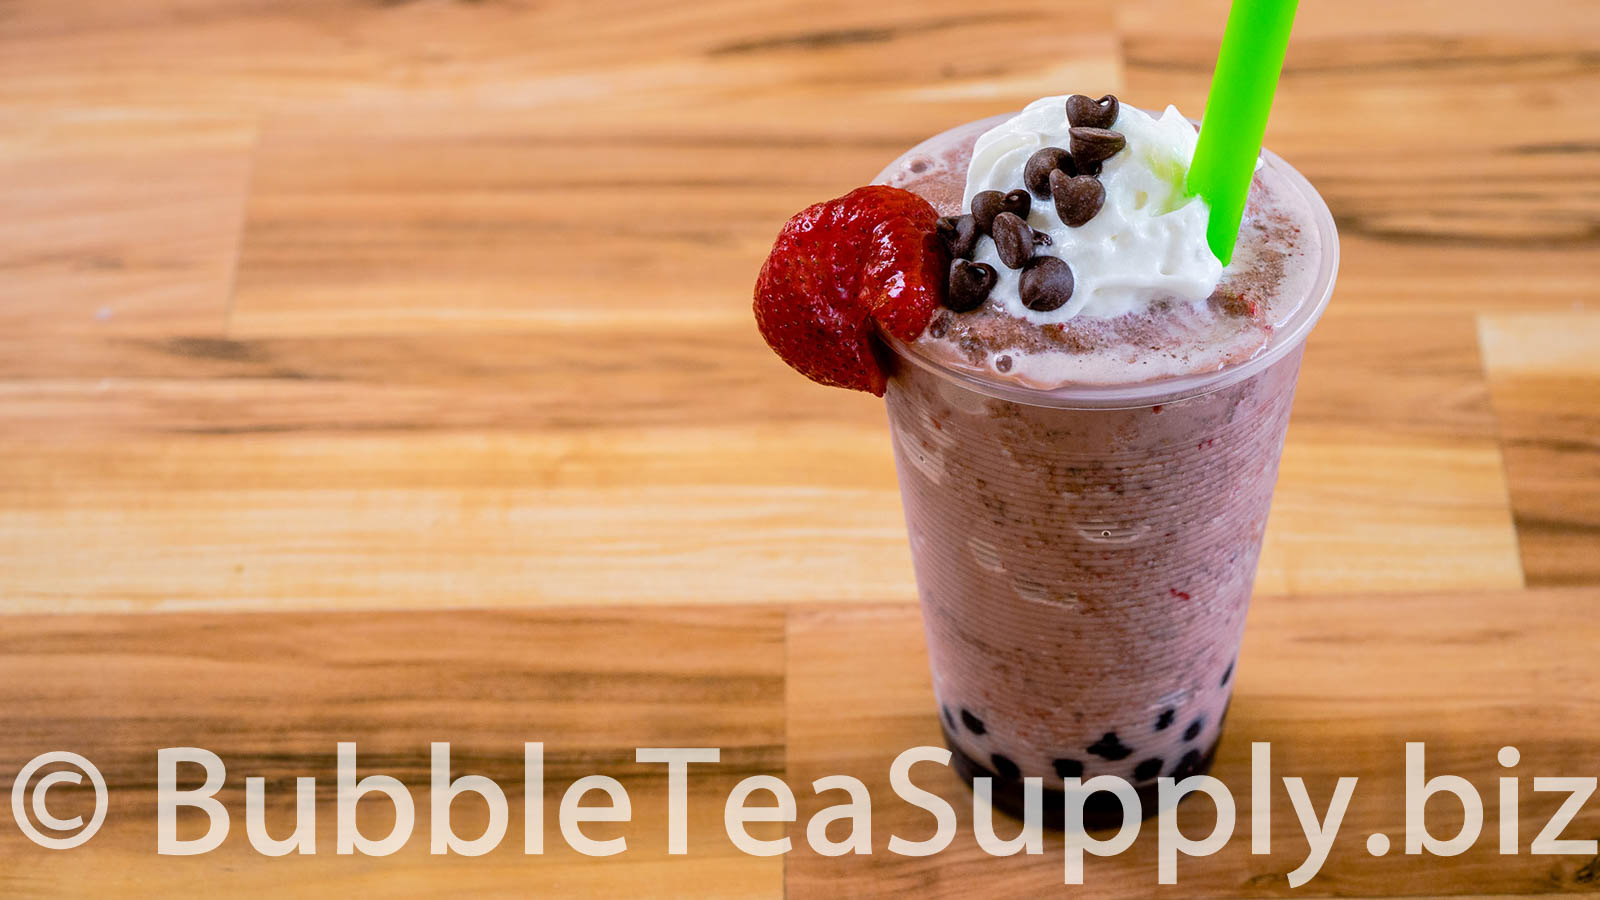 How to Make Strawberry Chocolate Chip Bubble Tea with Boba Tapioca Pearls